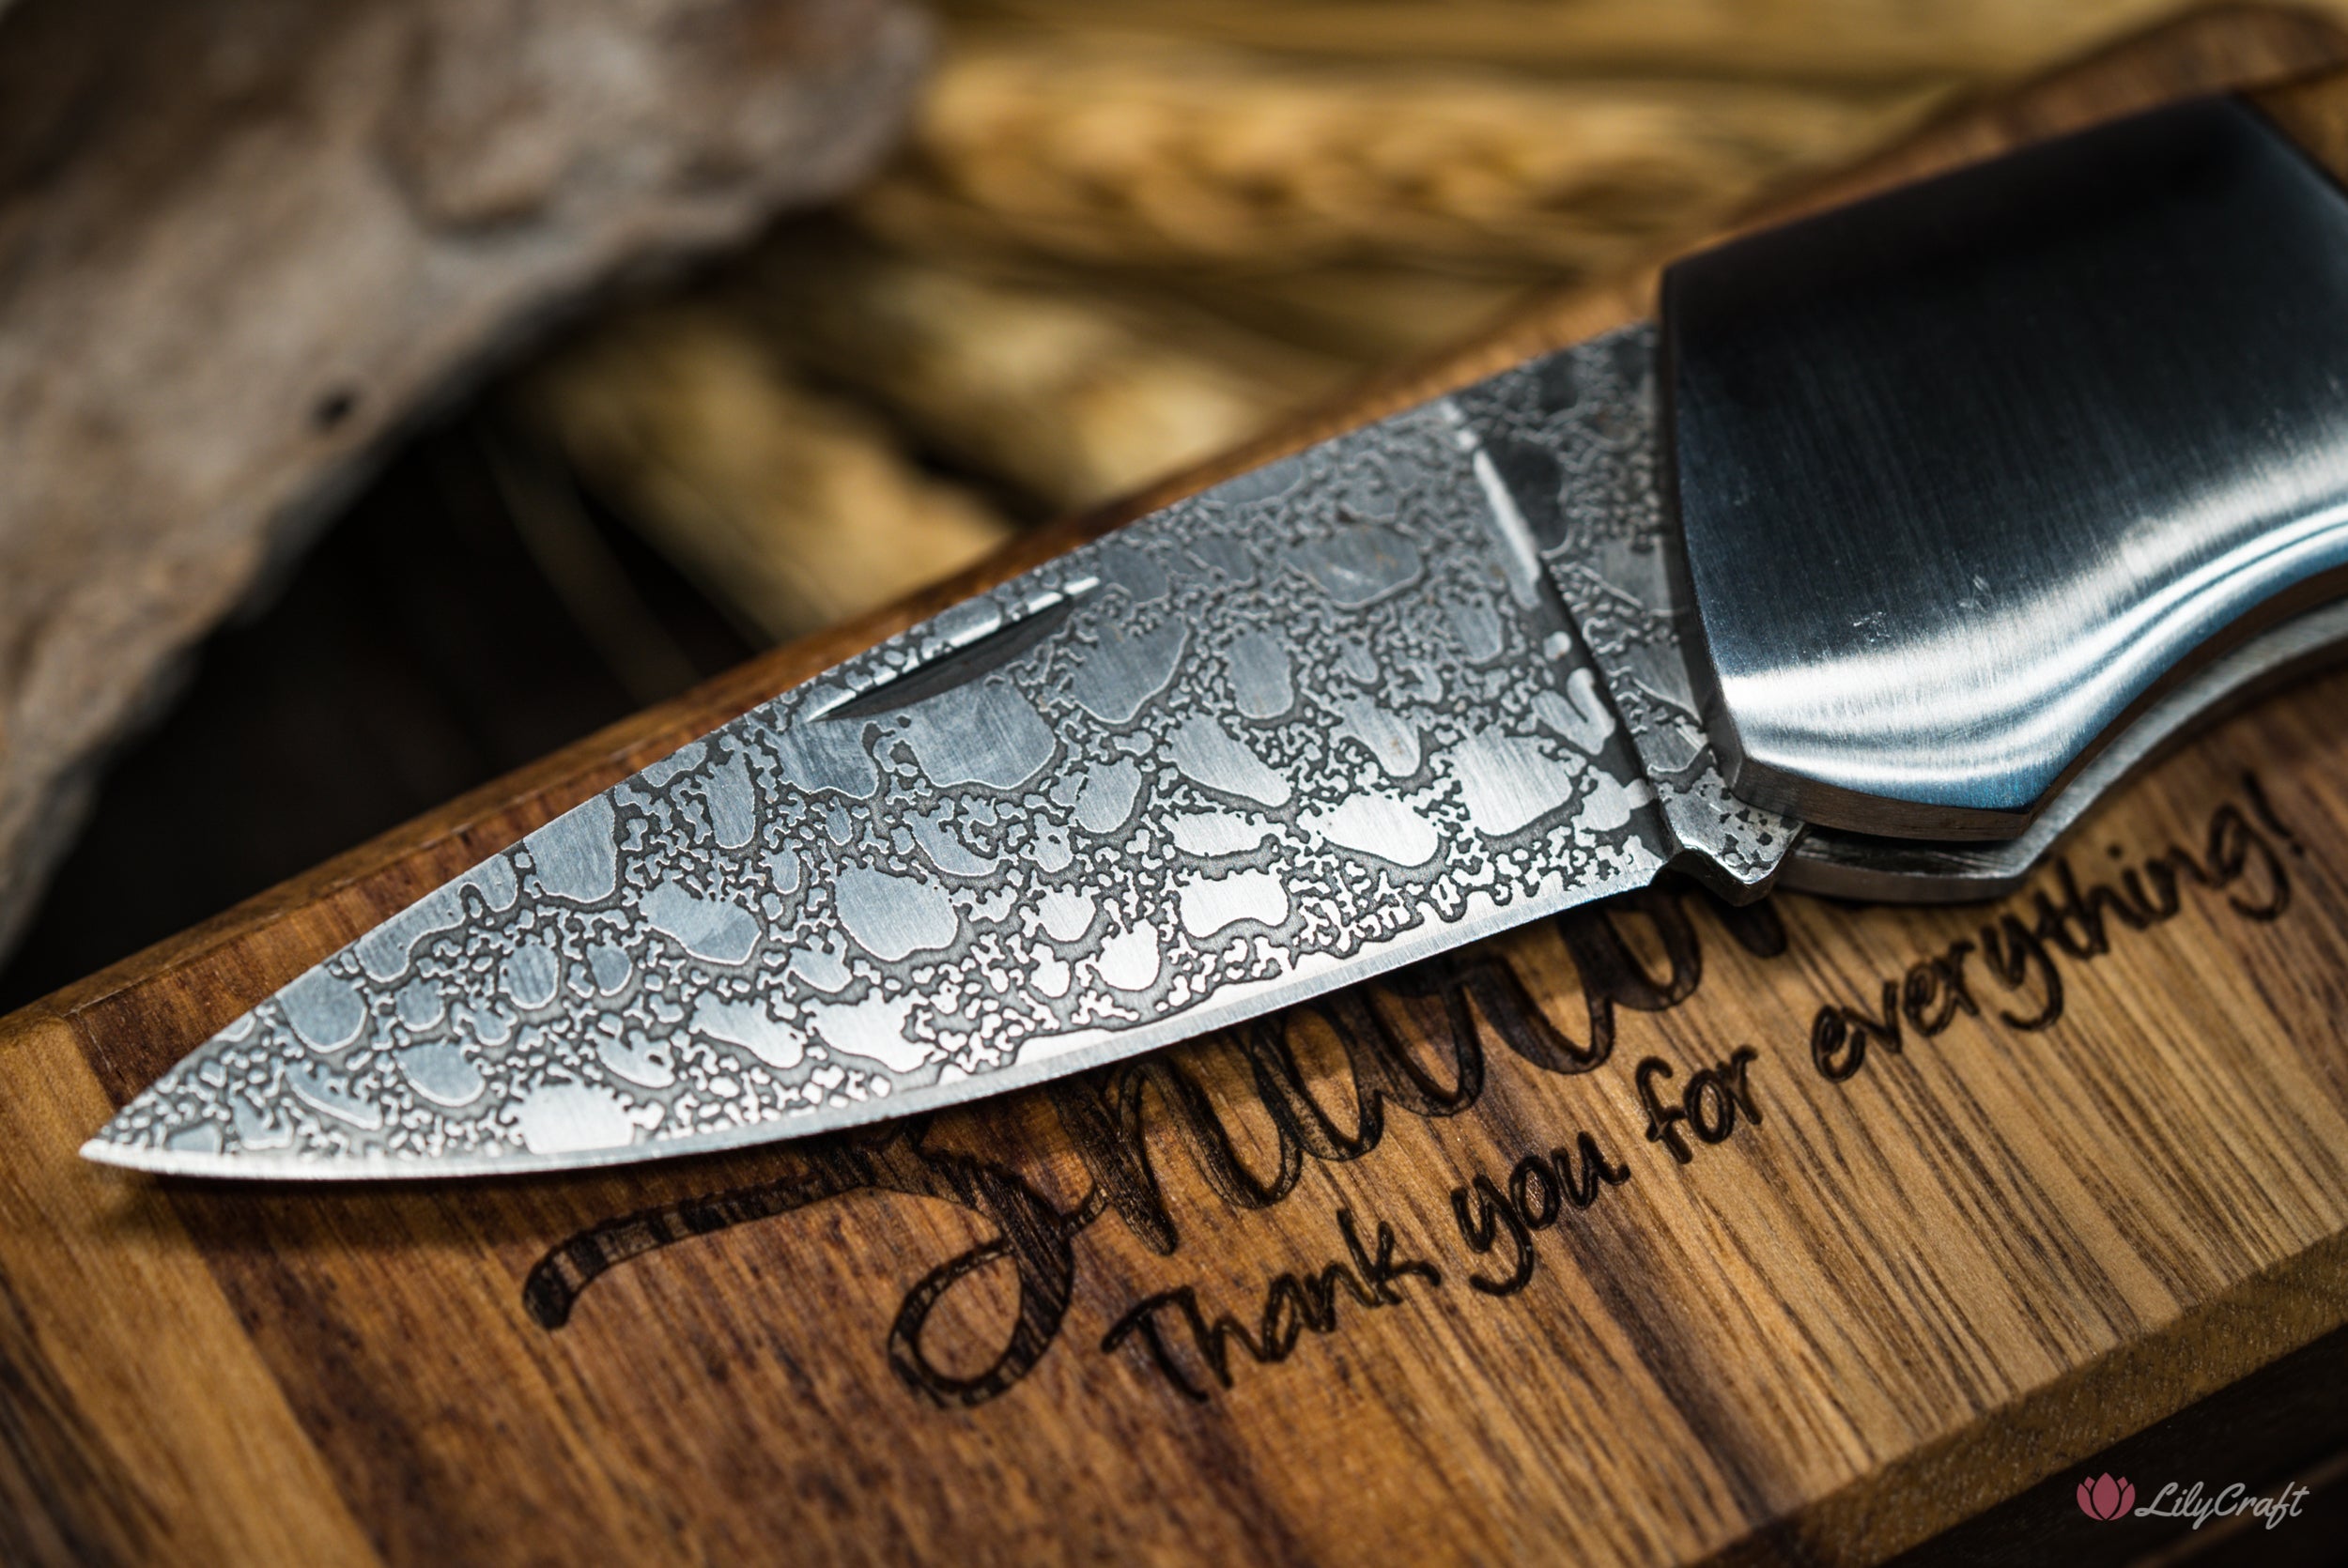 Close-up of sharp folding knife blade with intricate design